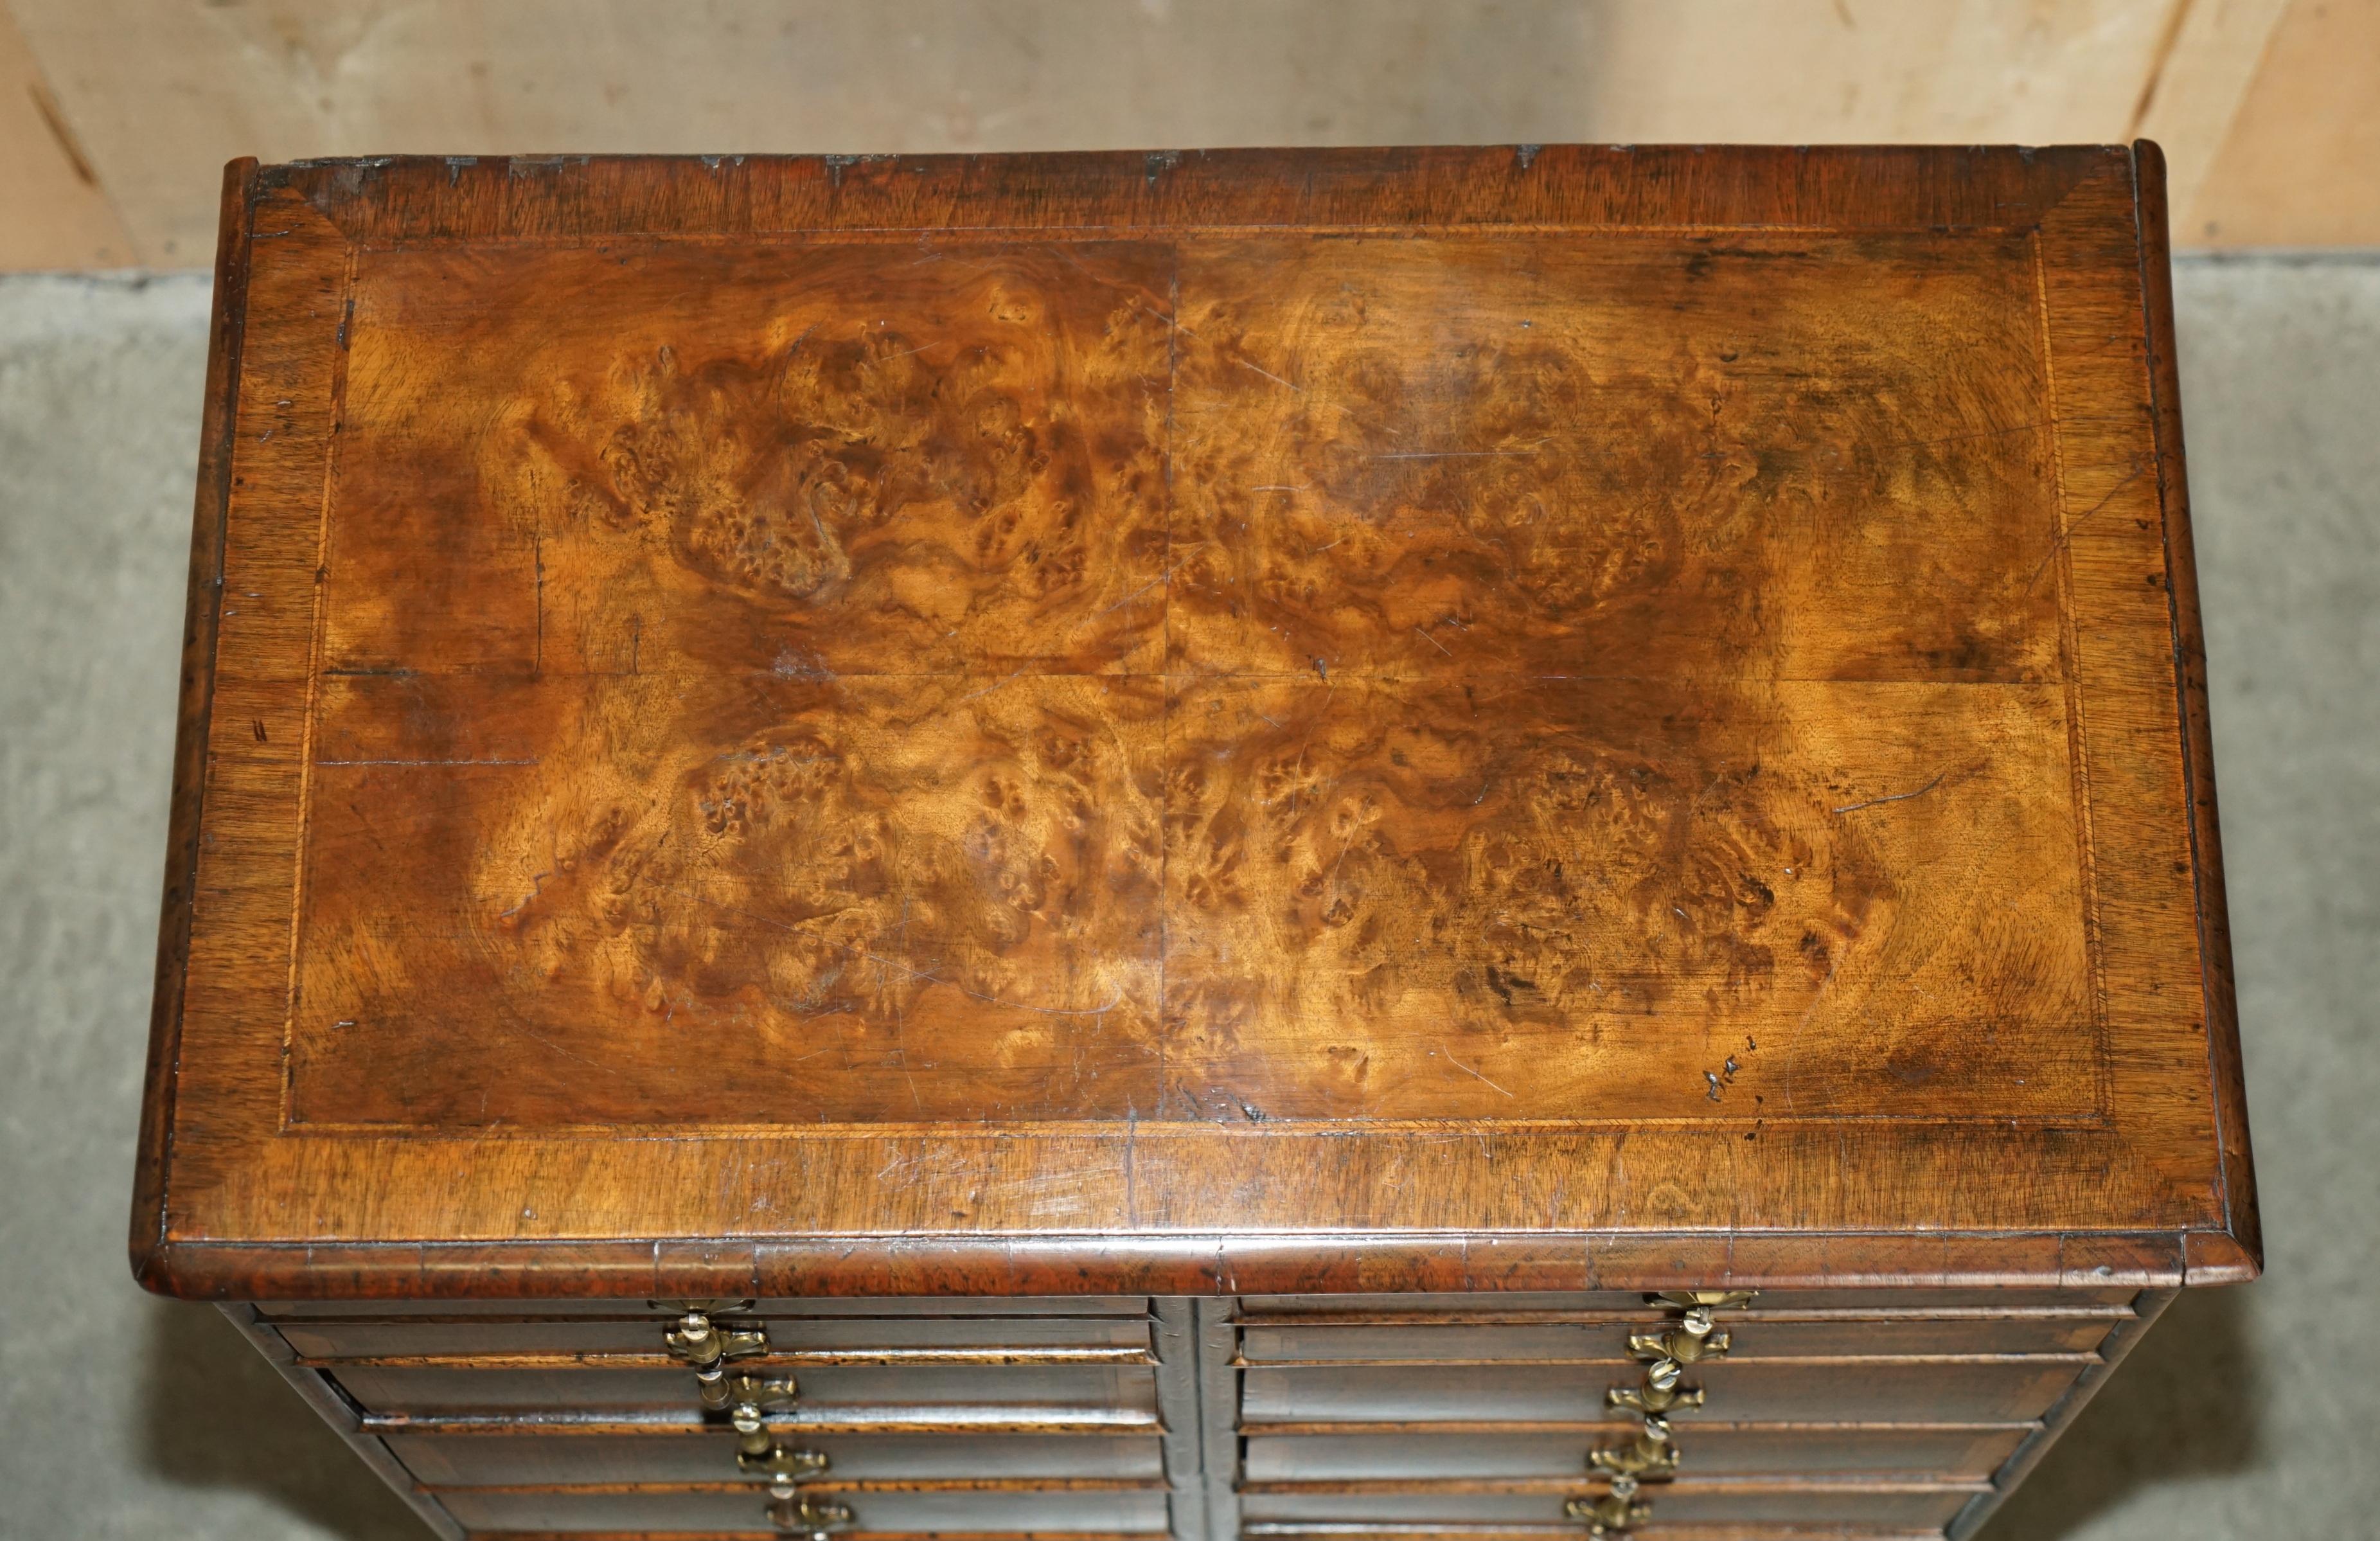 EXQUISITE ANTIQUE CIRCA 1760 BURR WALNUT GEORGE III BANK / CHEST OF DRAWERs For Sale 2